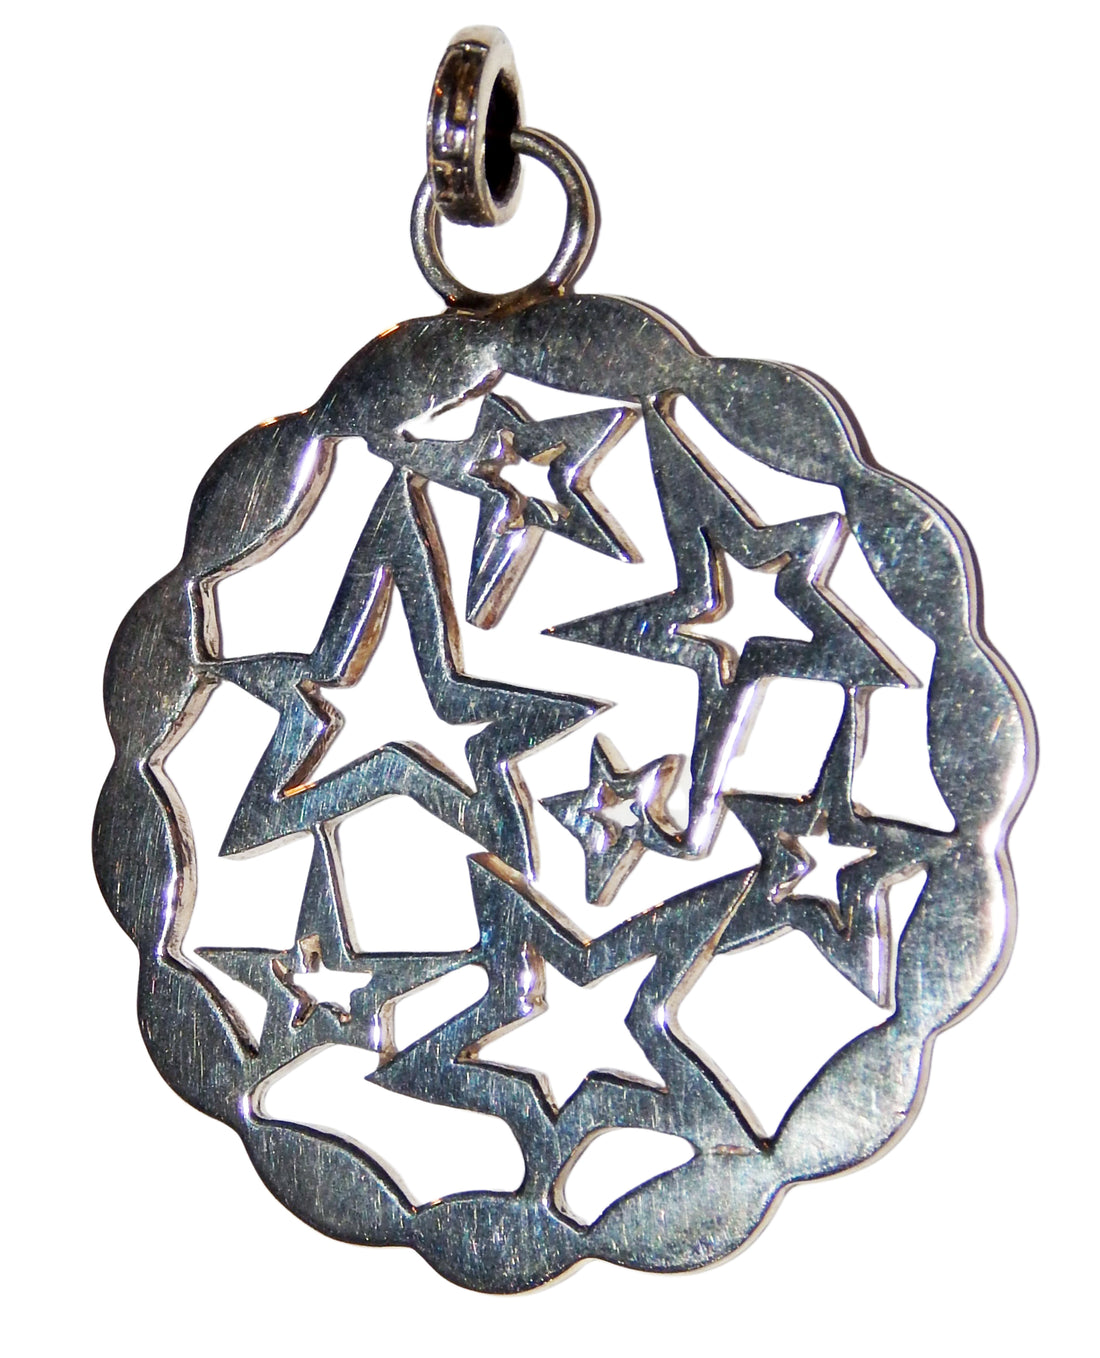 LYDIA MARCOS DESIGN - "STAR CLUSTER" Silver Pendant